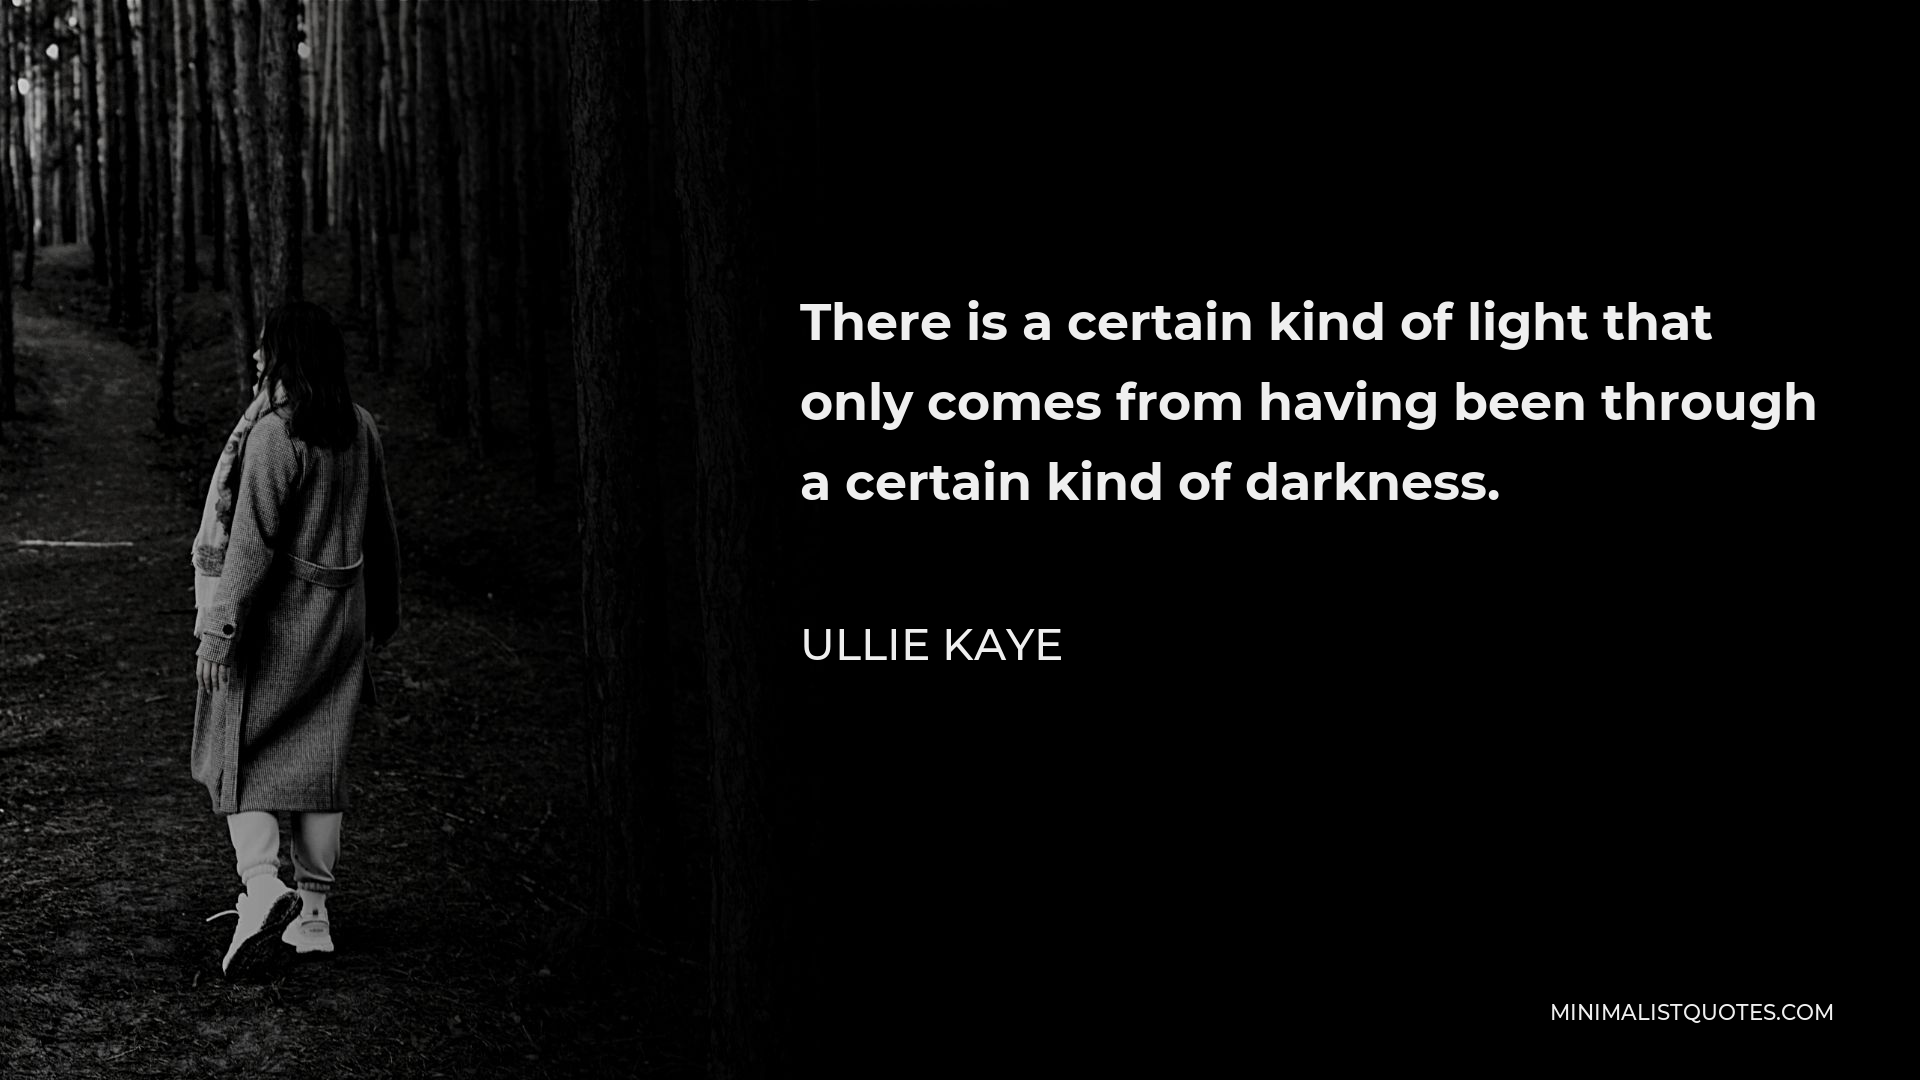 Ullie Kaye Quote - There is a certain kind of light that only comes from having been through a certain kind of darkness.